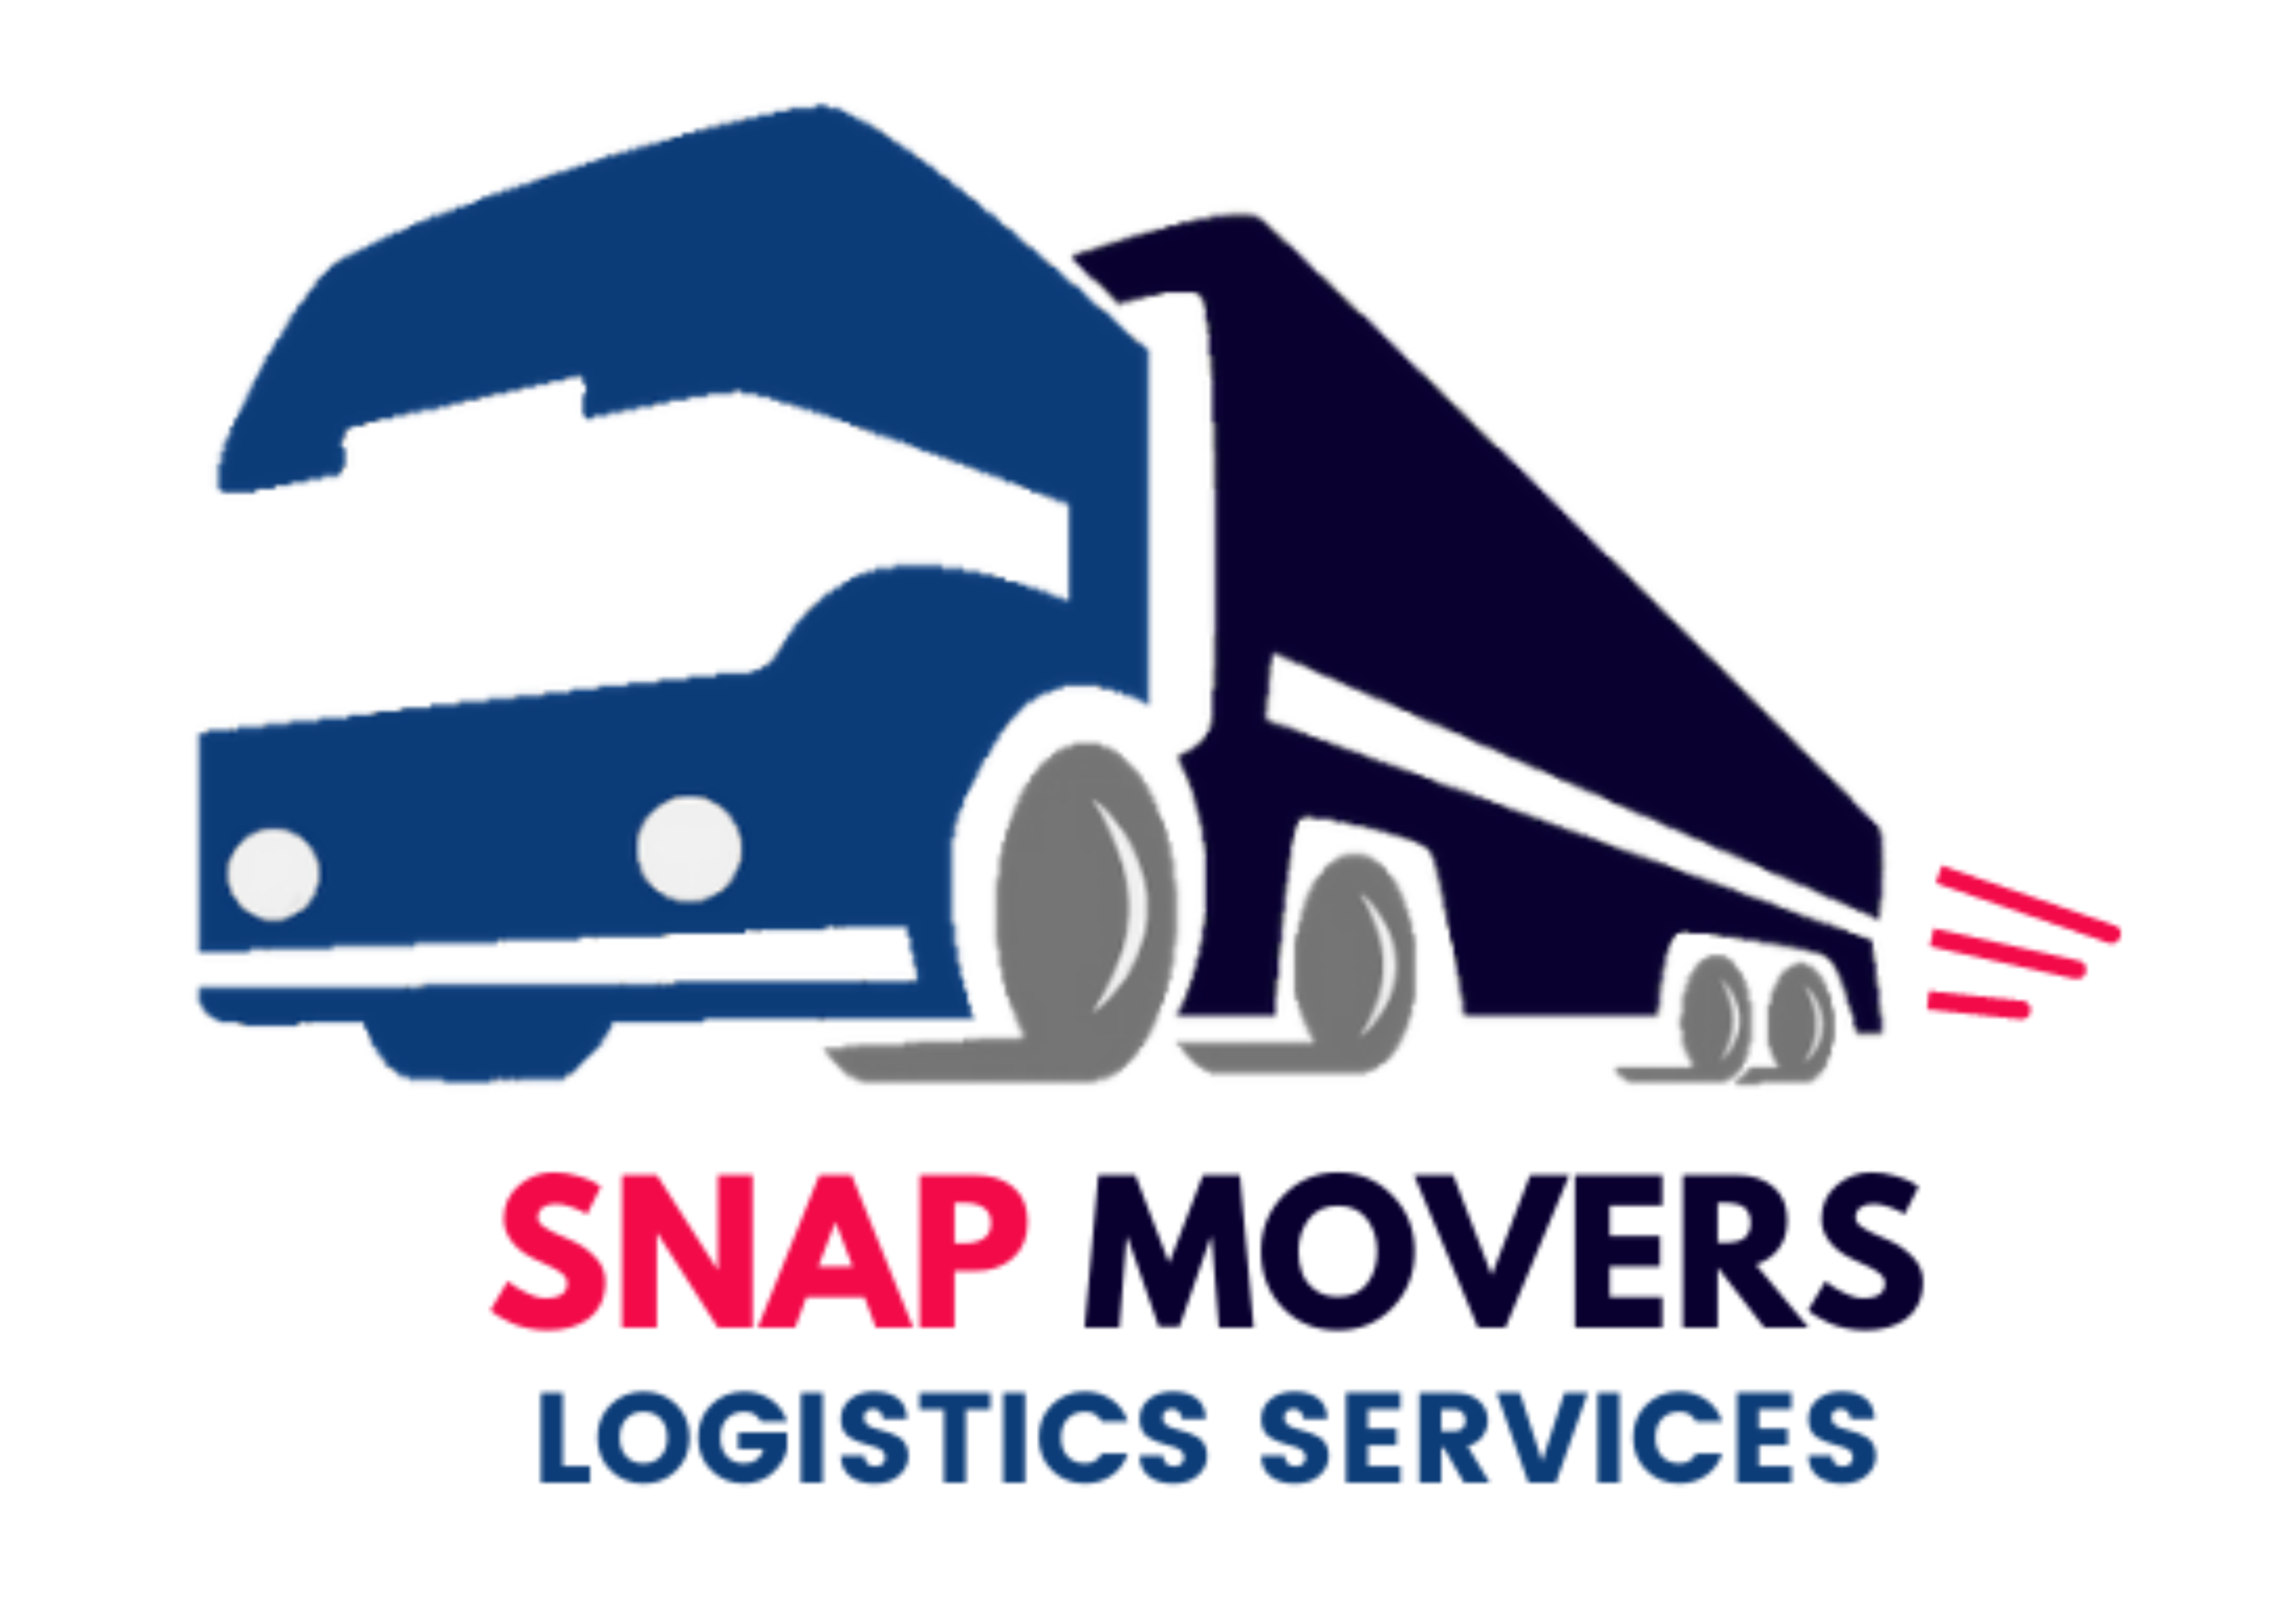 Snap Movers Logistics Services